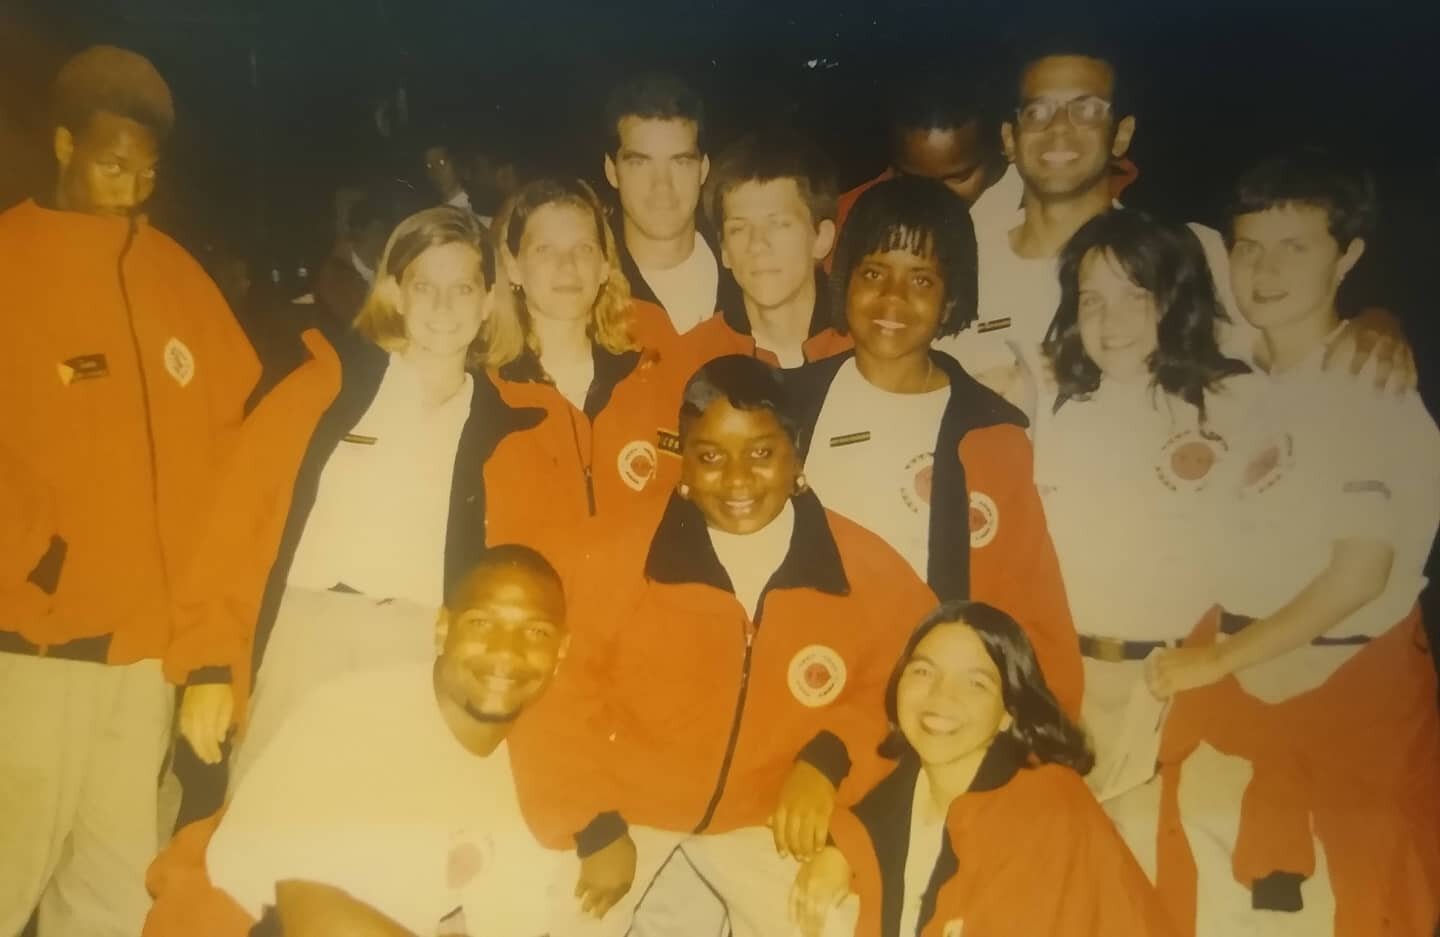 I was 17 my first year as an AmeriCorps member. I worked on the Southside of Columbus with my team turning an old church into a community center complete with a free store, after school program and more. 

My second year of service I worked in a midd